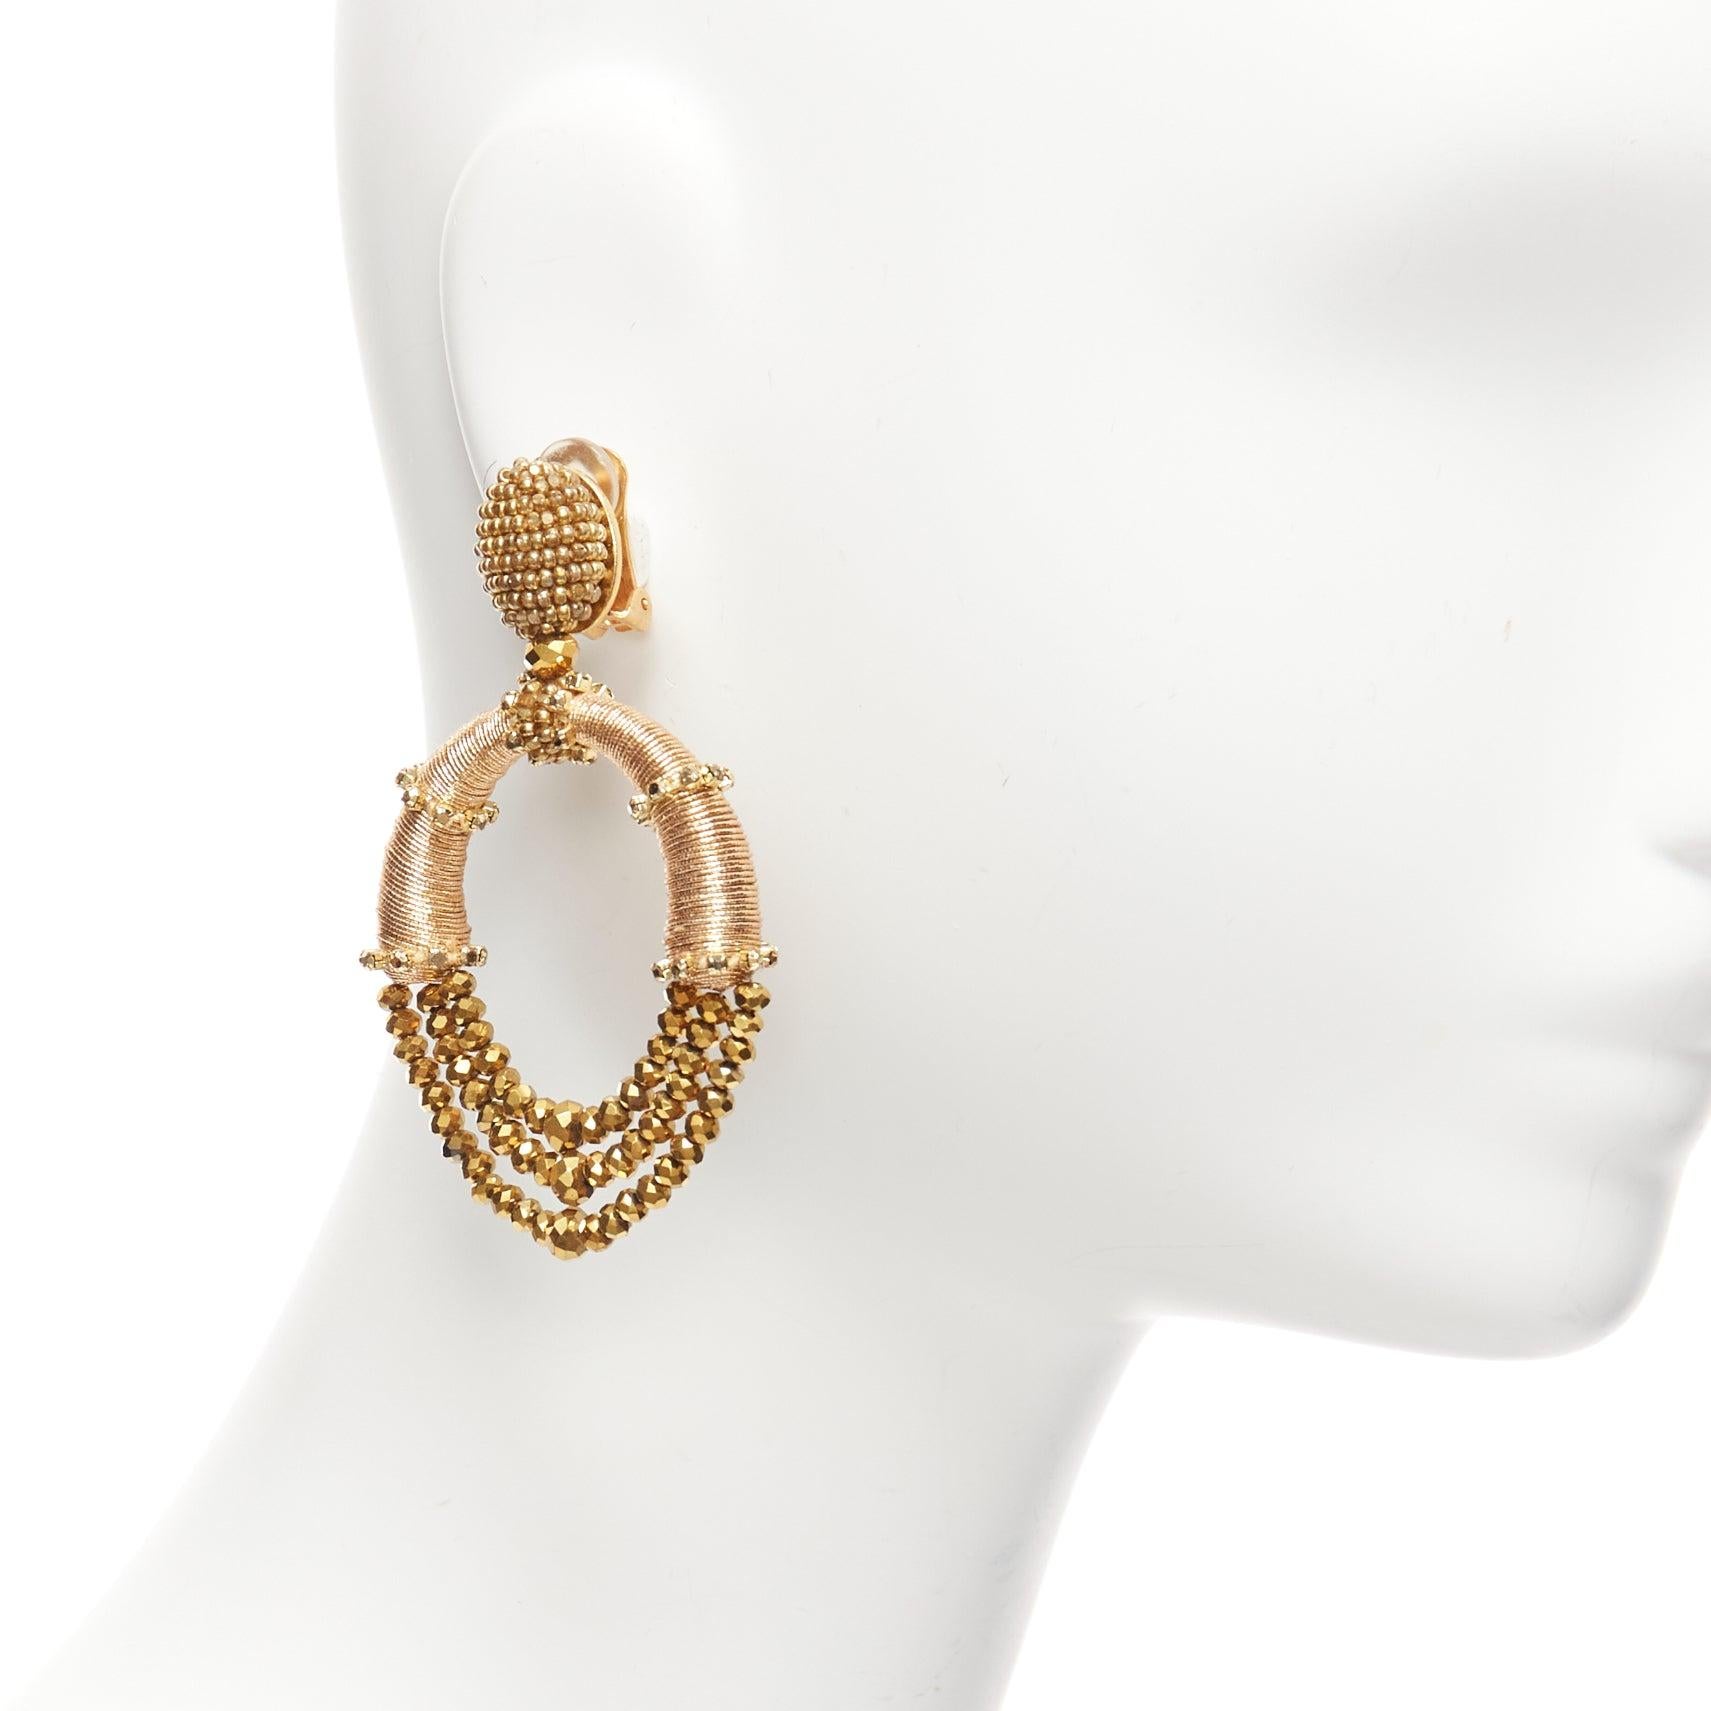 OSCAR DE LA RENTA bronze gold beaded coil big hoop dangling clip on earrings pair
Reference: AAWC/A01055
Brand: Oscar de la Renta
Material: Metal, Acrylic
Color: Gold, Bronze
Pattern: Solid
Closure: Clip On
Lining: Gold Metal
Made in: